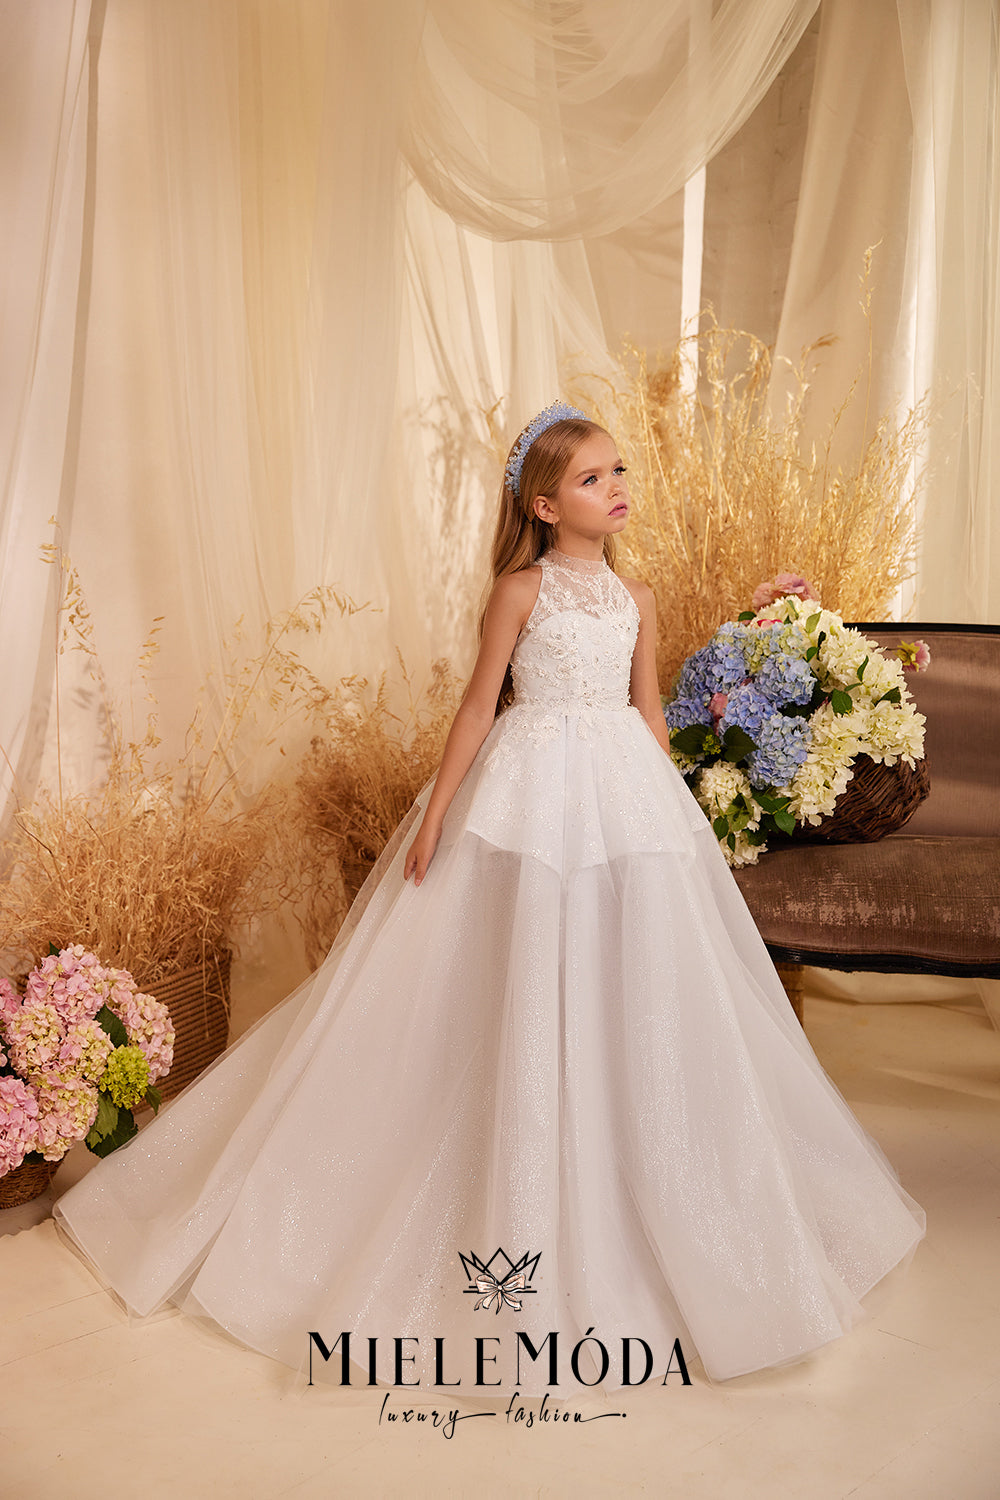 White High Neck Flower Girl Dresses With Sash Long Sleeves Tiers Little Girl  Wedding Gowns Lace And Tulle Tiered Girls Pageant Dress From Click_me,  $87.44 | DHgate.Com